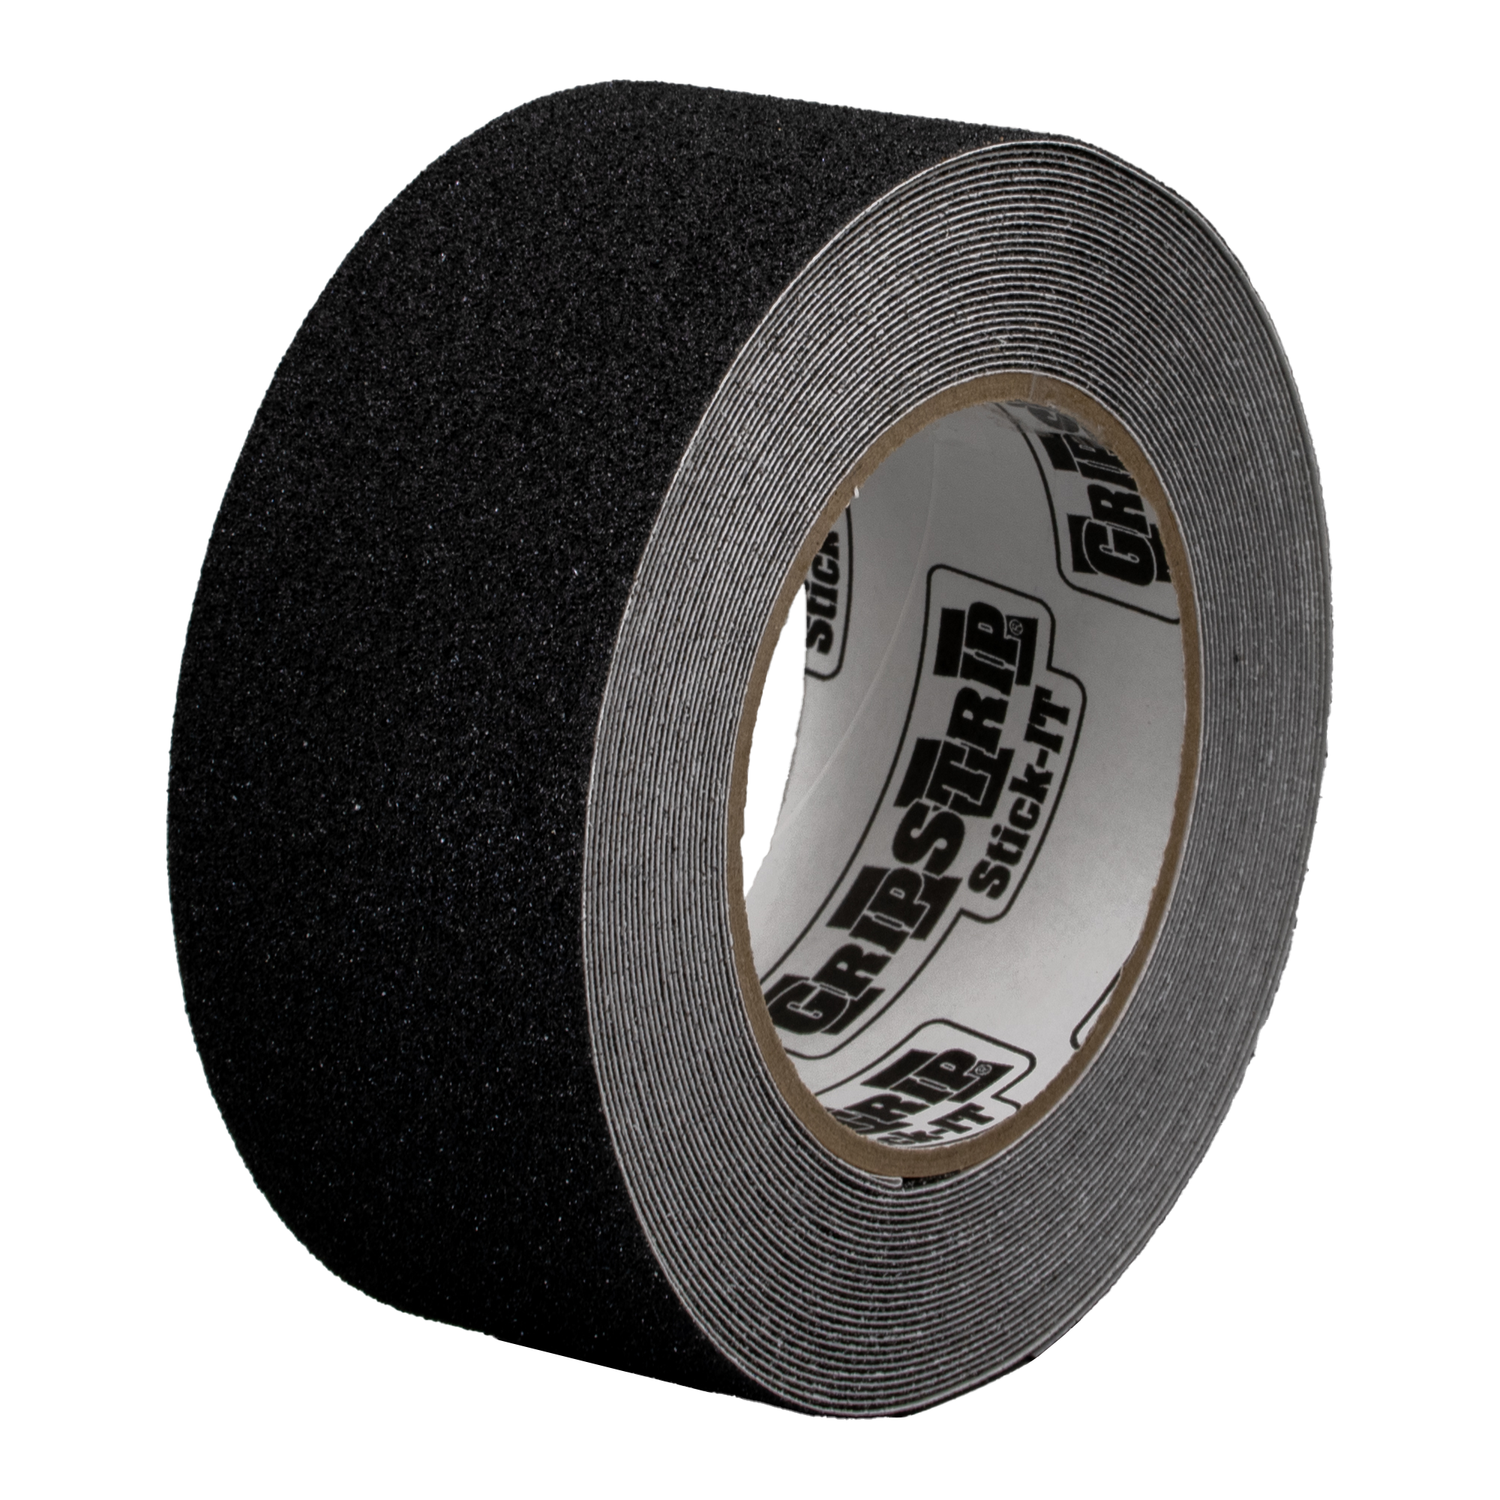 2" width 15 - 60 ft Grip Tape Products Black